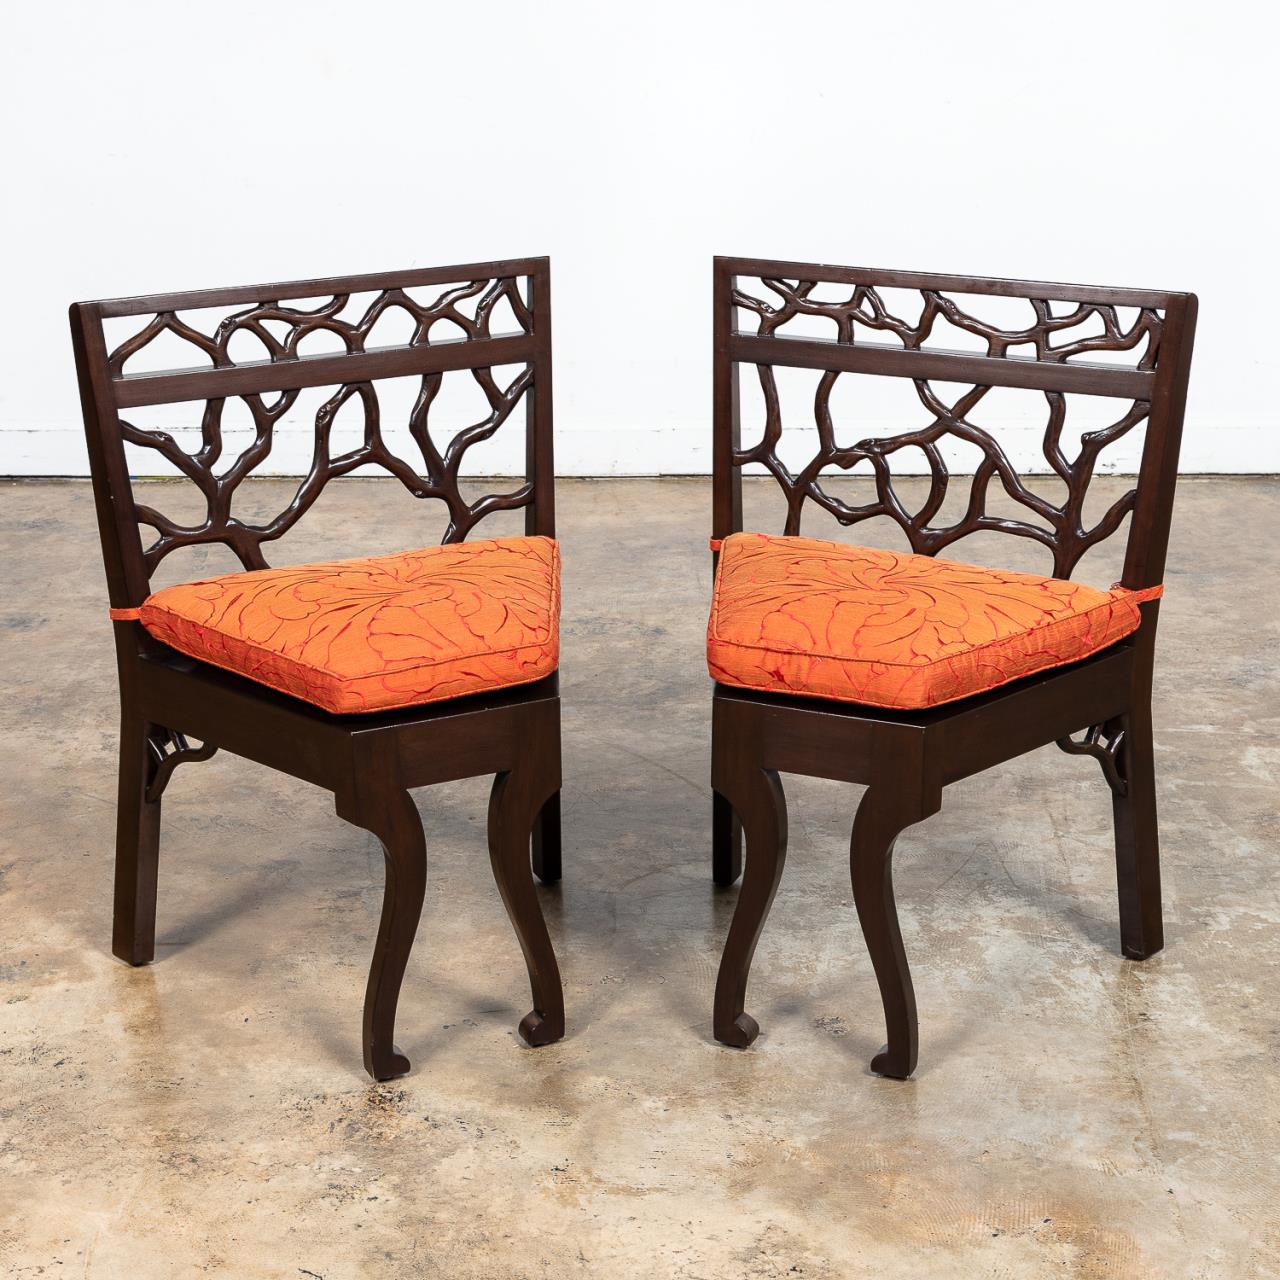 ANN GETTY HOUSE "RUSTIC CHINESE" TABLE & CHAIRS - Image 5 of 7